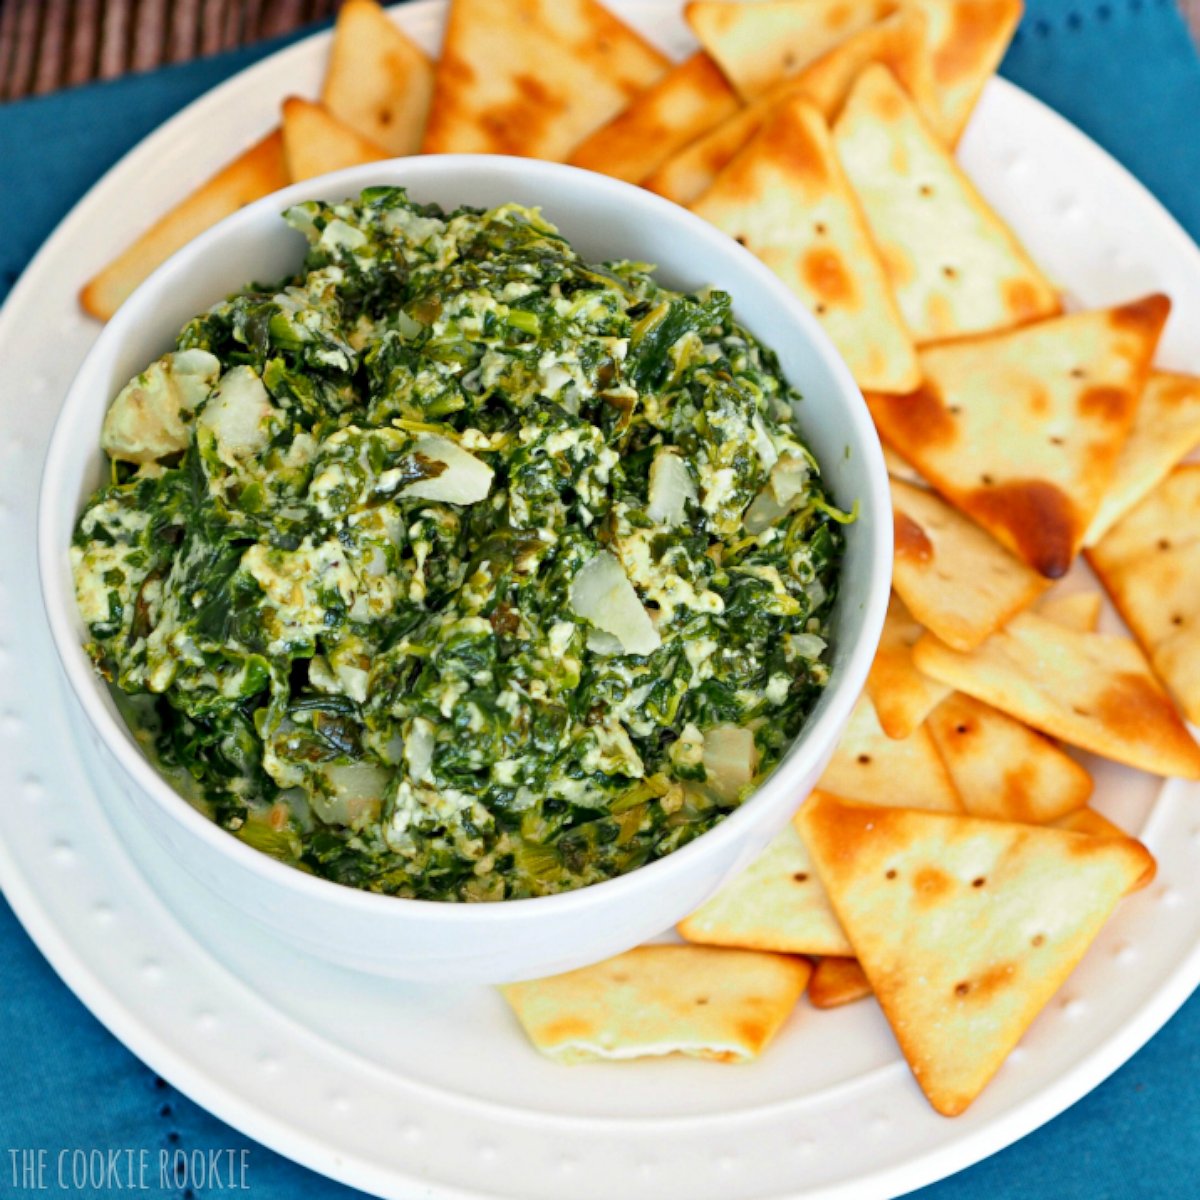 PHOTO:Crockpot Skinny Parmesan Spinach dip created by The Cookie Rookie.  